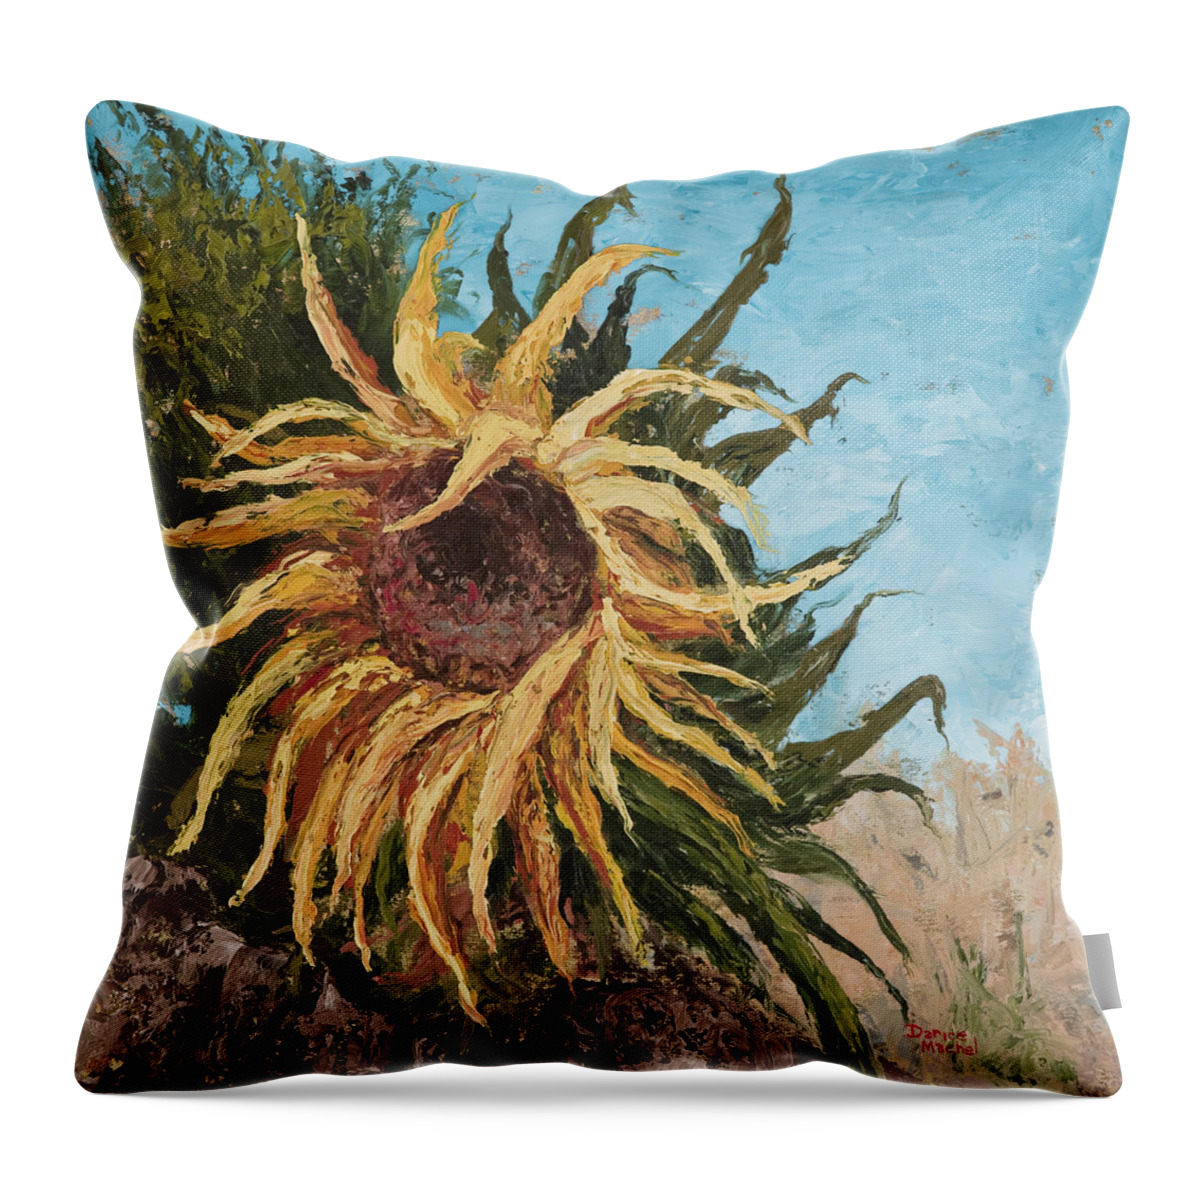 Sunflower Throw Pillow featuring the painting Sunflower by Darice Machel McGuire